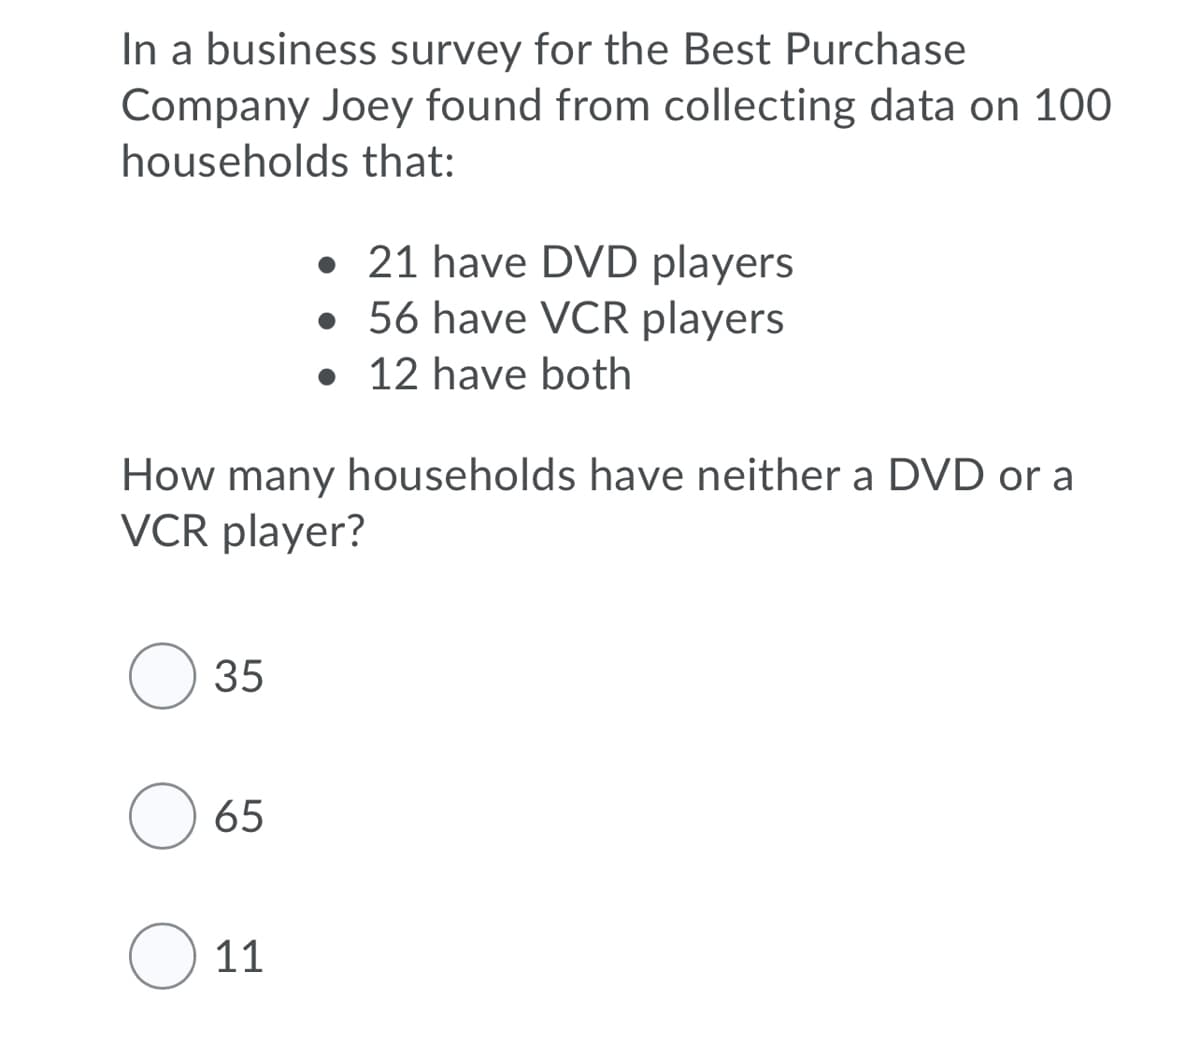 In a business survey for the Best Purchase
Company Joey found from collecting data on 100
households that:
• 21 have DVD players
• 56 have VCR players
• 12 have both
How many households have neither a DVD or a
VCR player?
35
65
O 11
